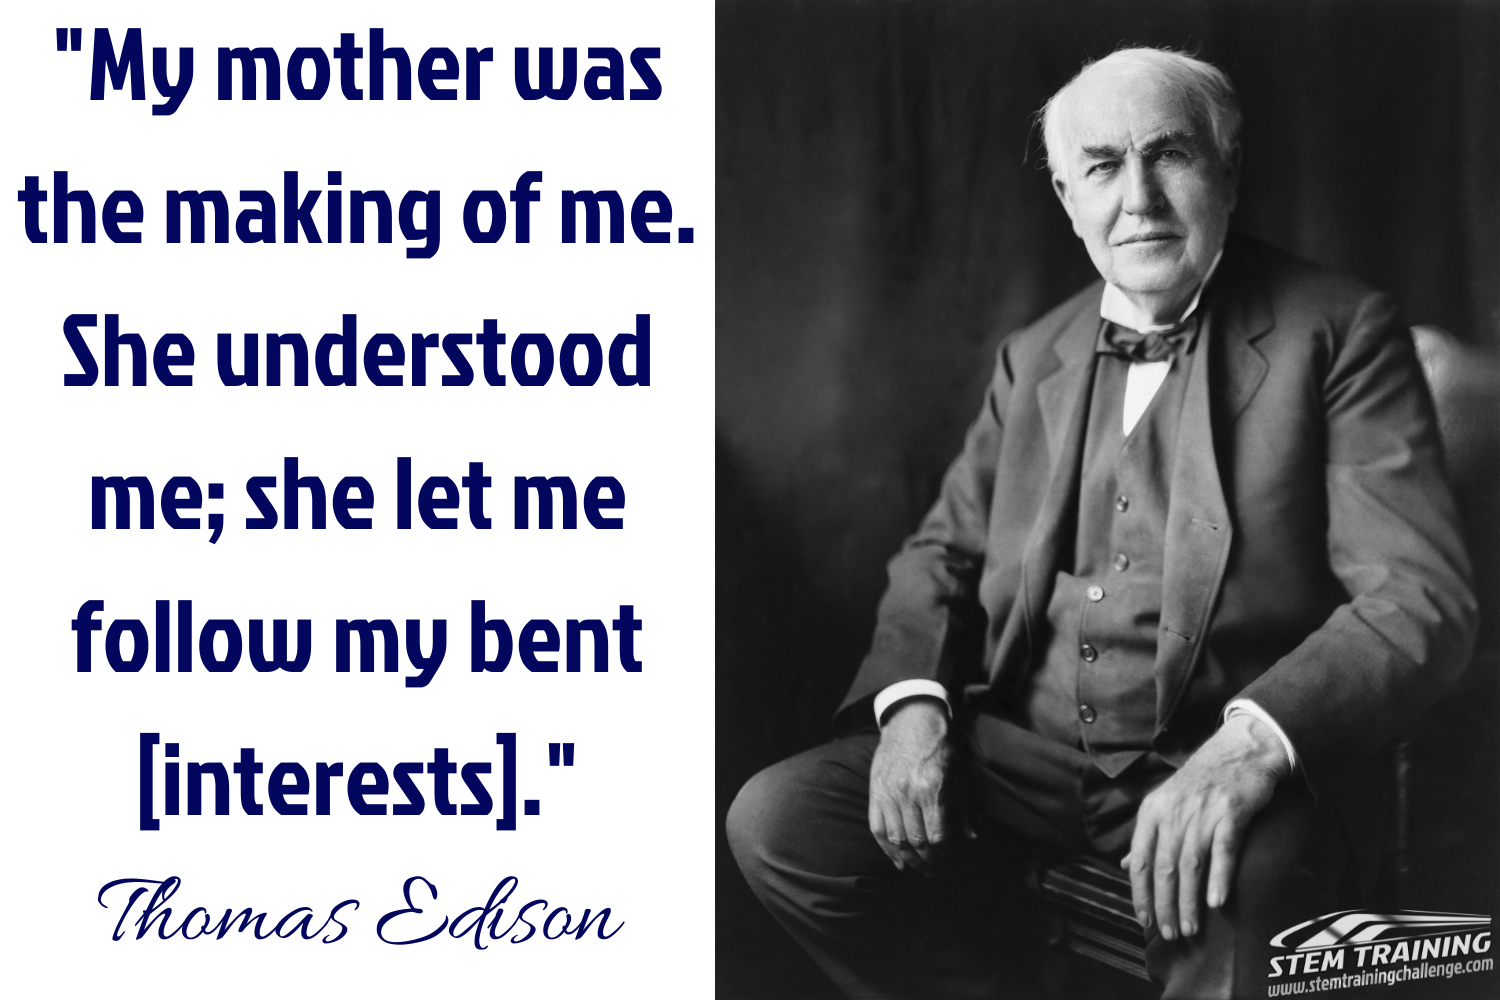 Thomas Edison quote about his mother. 